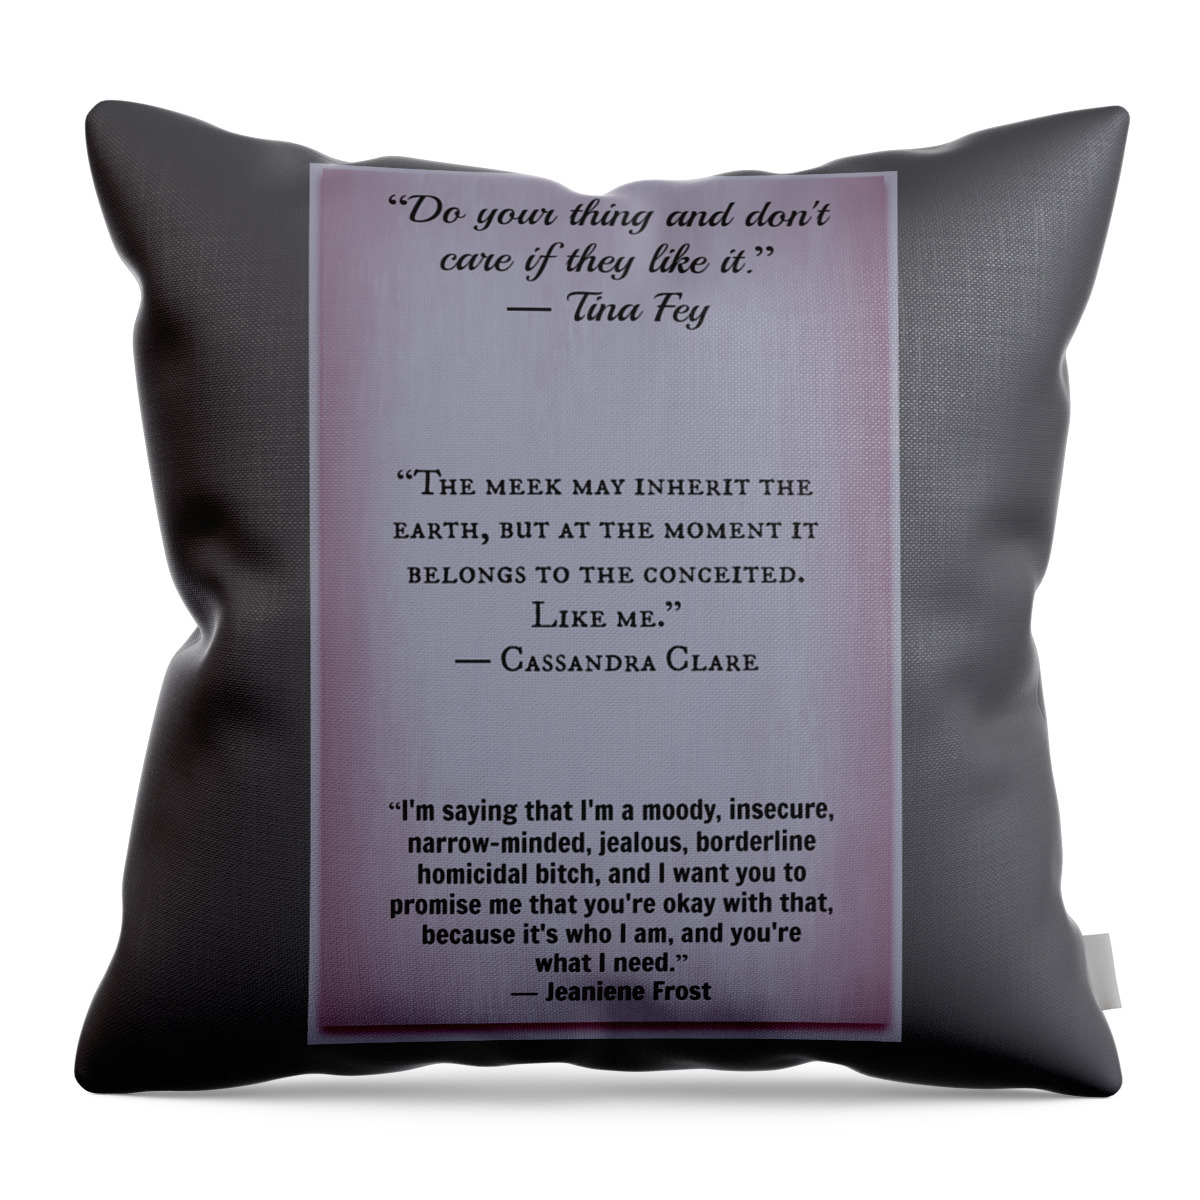  Throw Pillow featuring the photograph Inspire44 by David Norman